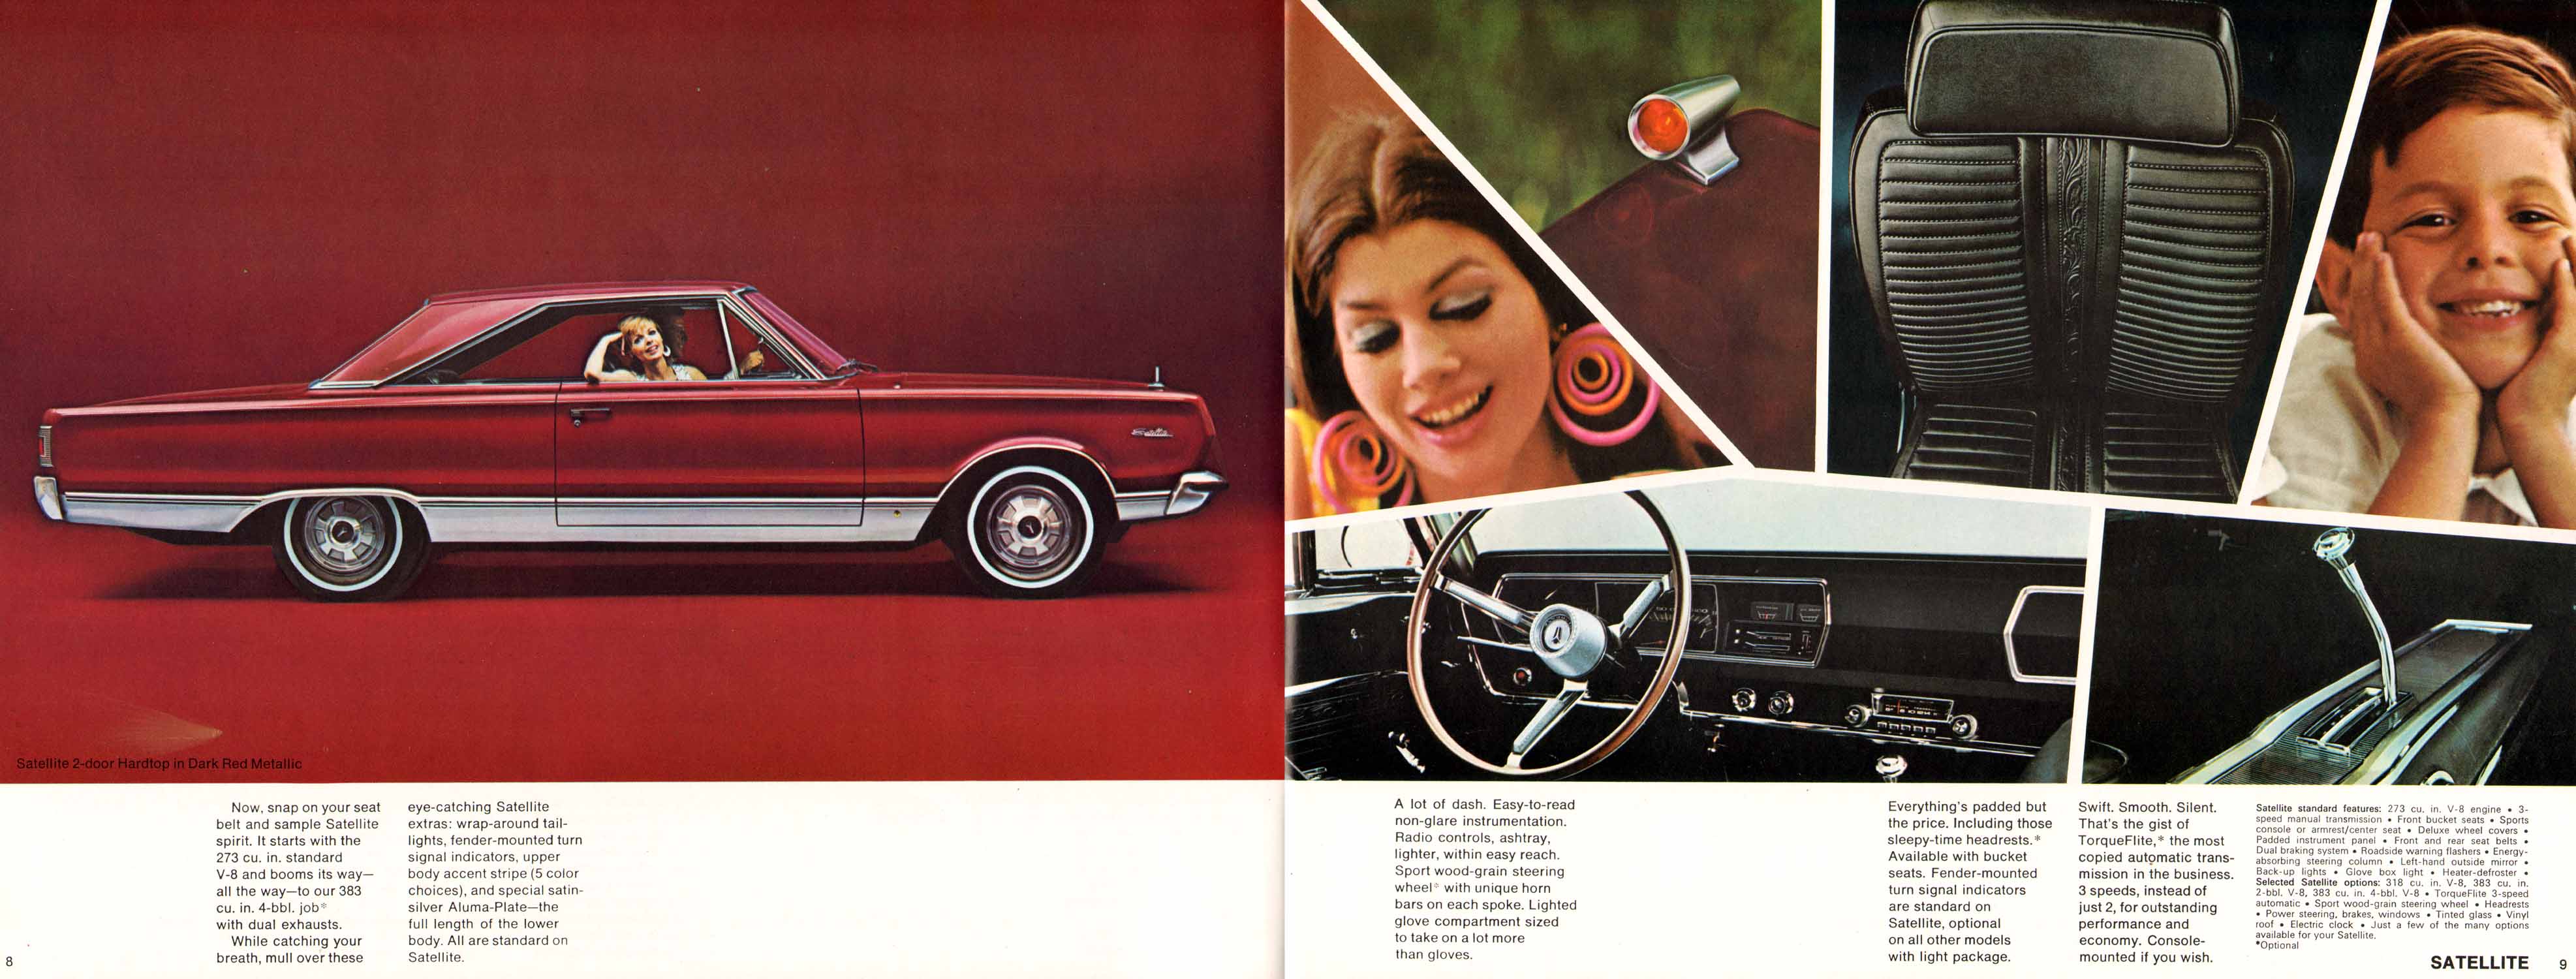 1967 Plymouth Belvedere-08-09